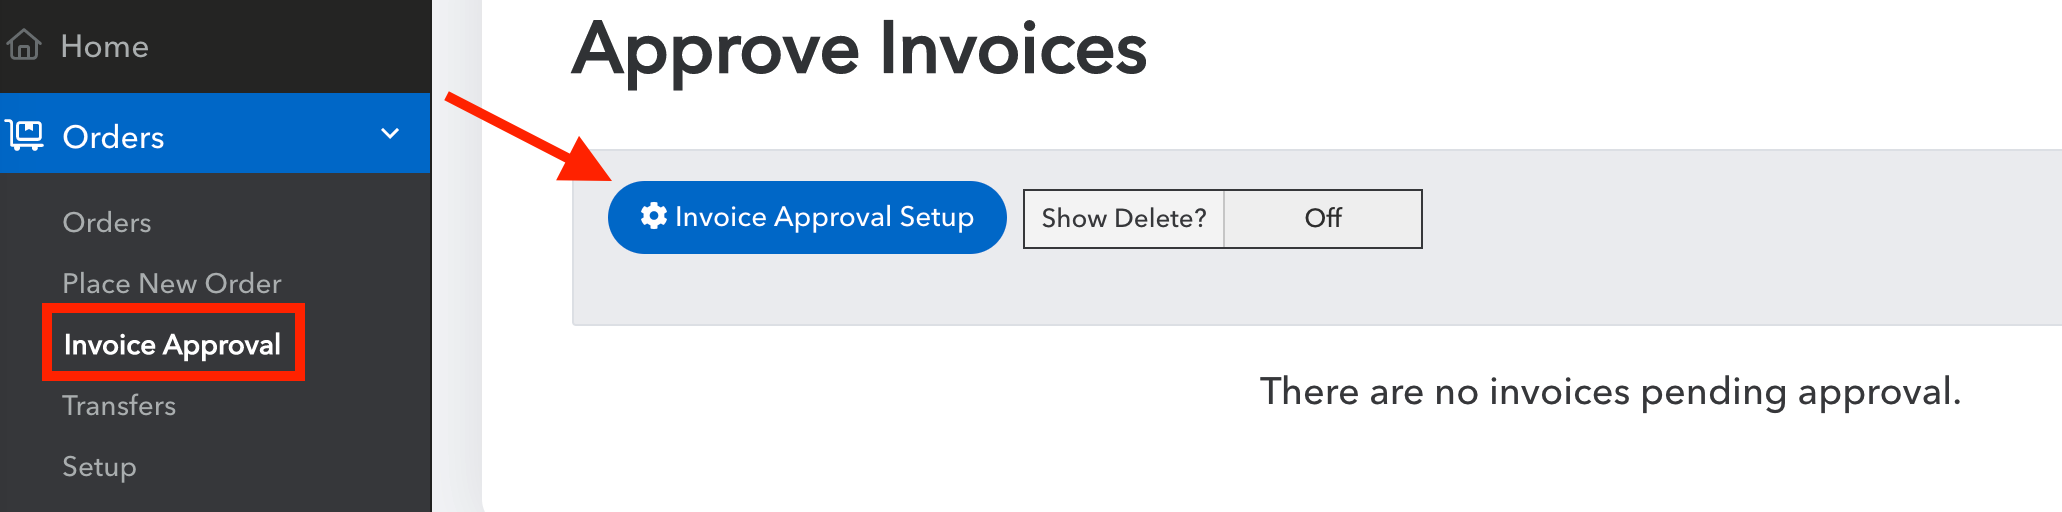 invoiceapproval2.png